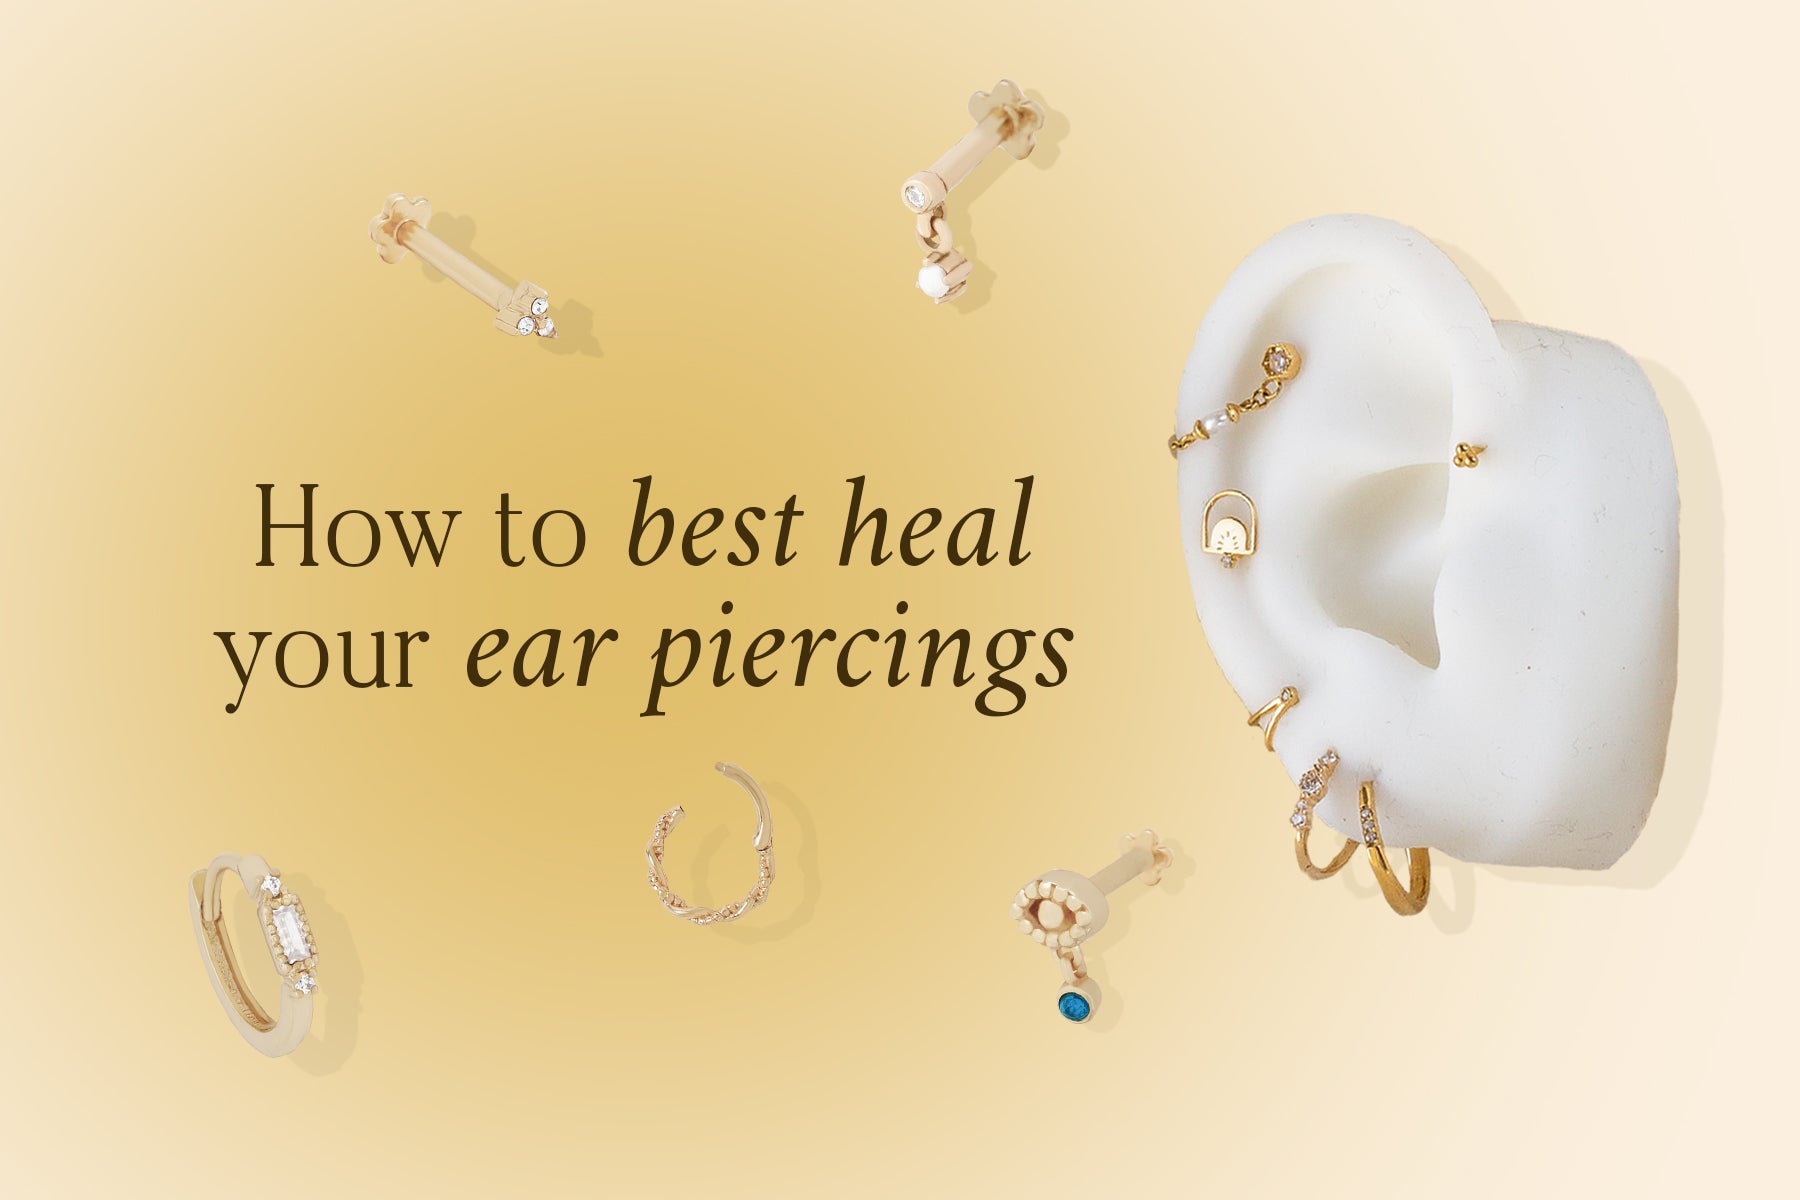 How to Best Heal Your Ear Piercings